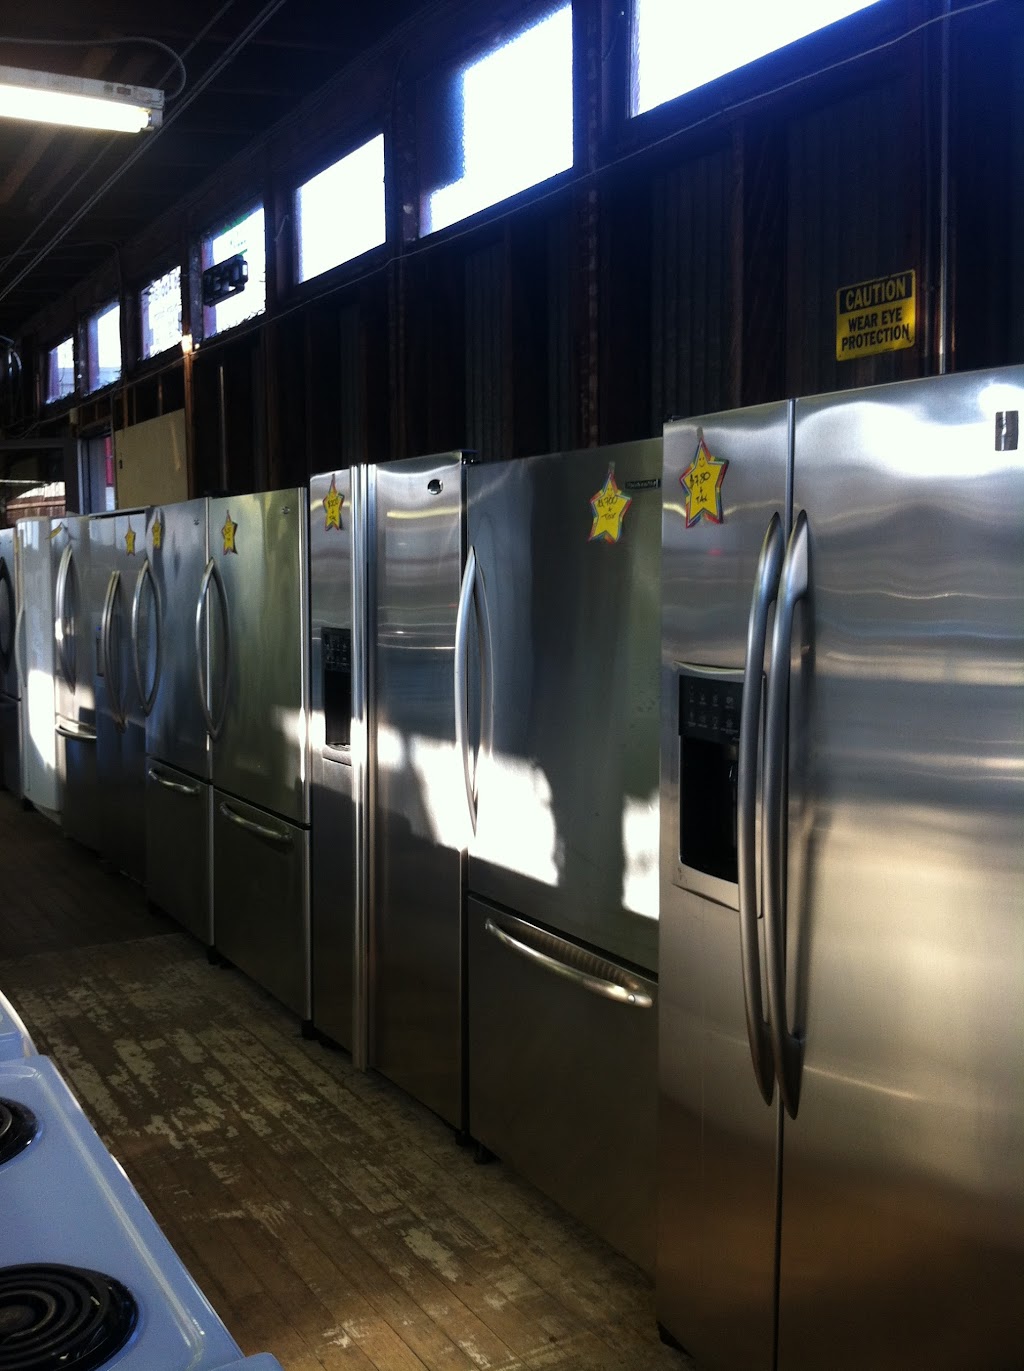 Marroquin Used Appliances | 21365 Foothill Blvd, Hayward, CA 94541 | Phone: (510) 728-2010